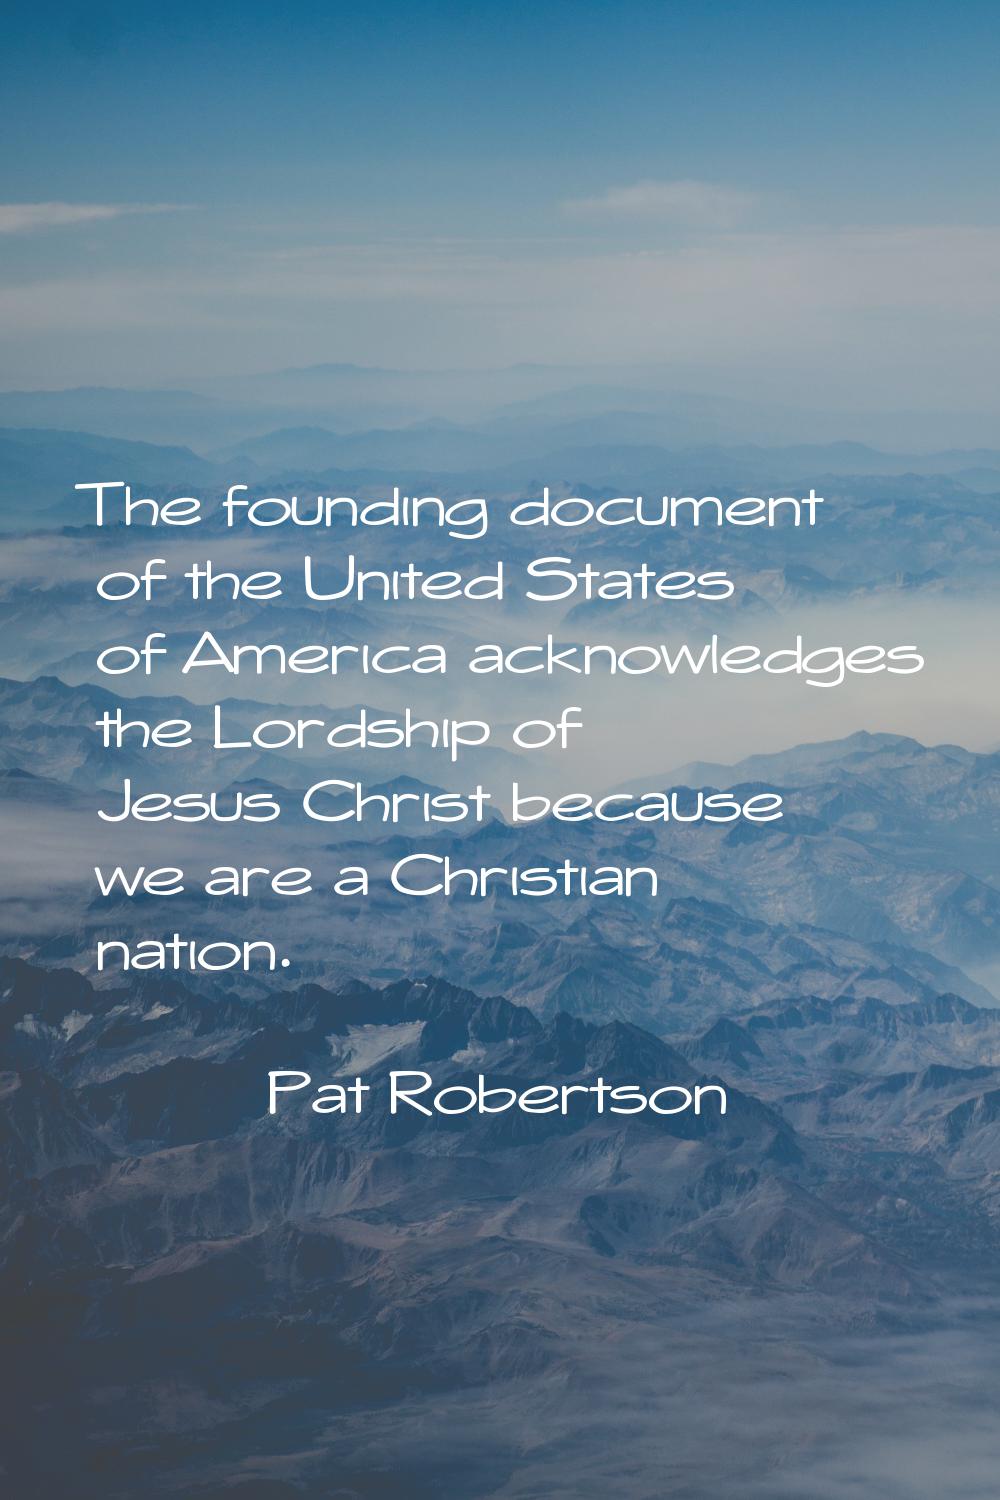 The founding document of the United States of America acknowledges the Lordship of Jesus Christ bec